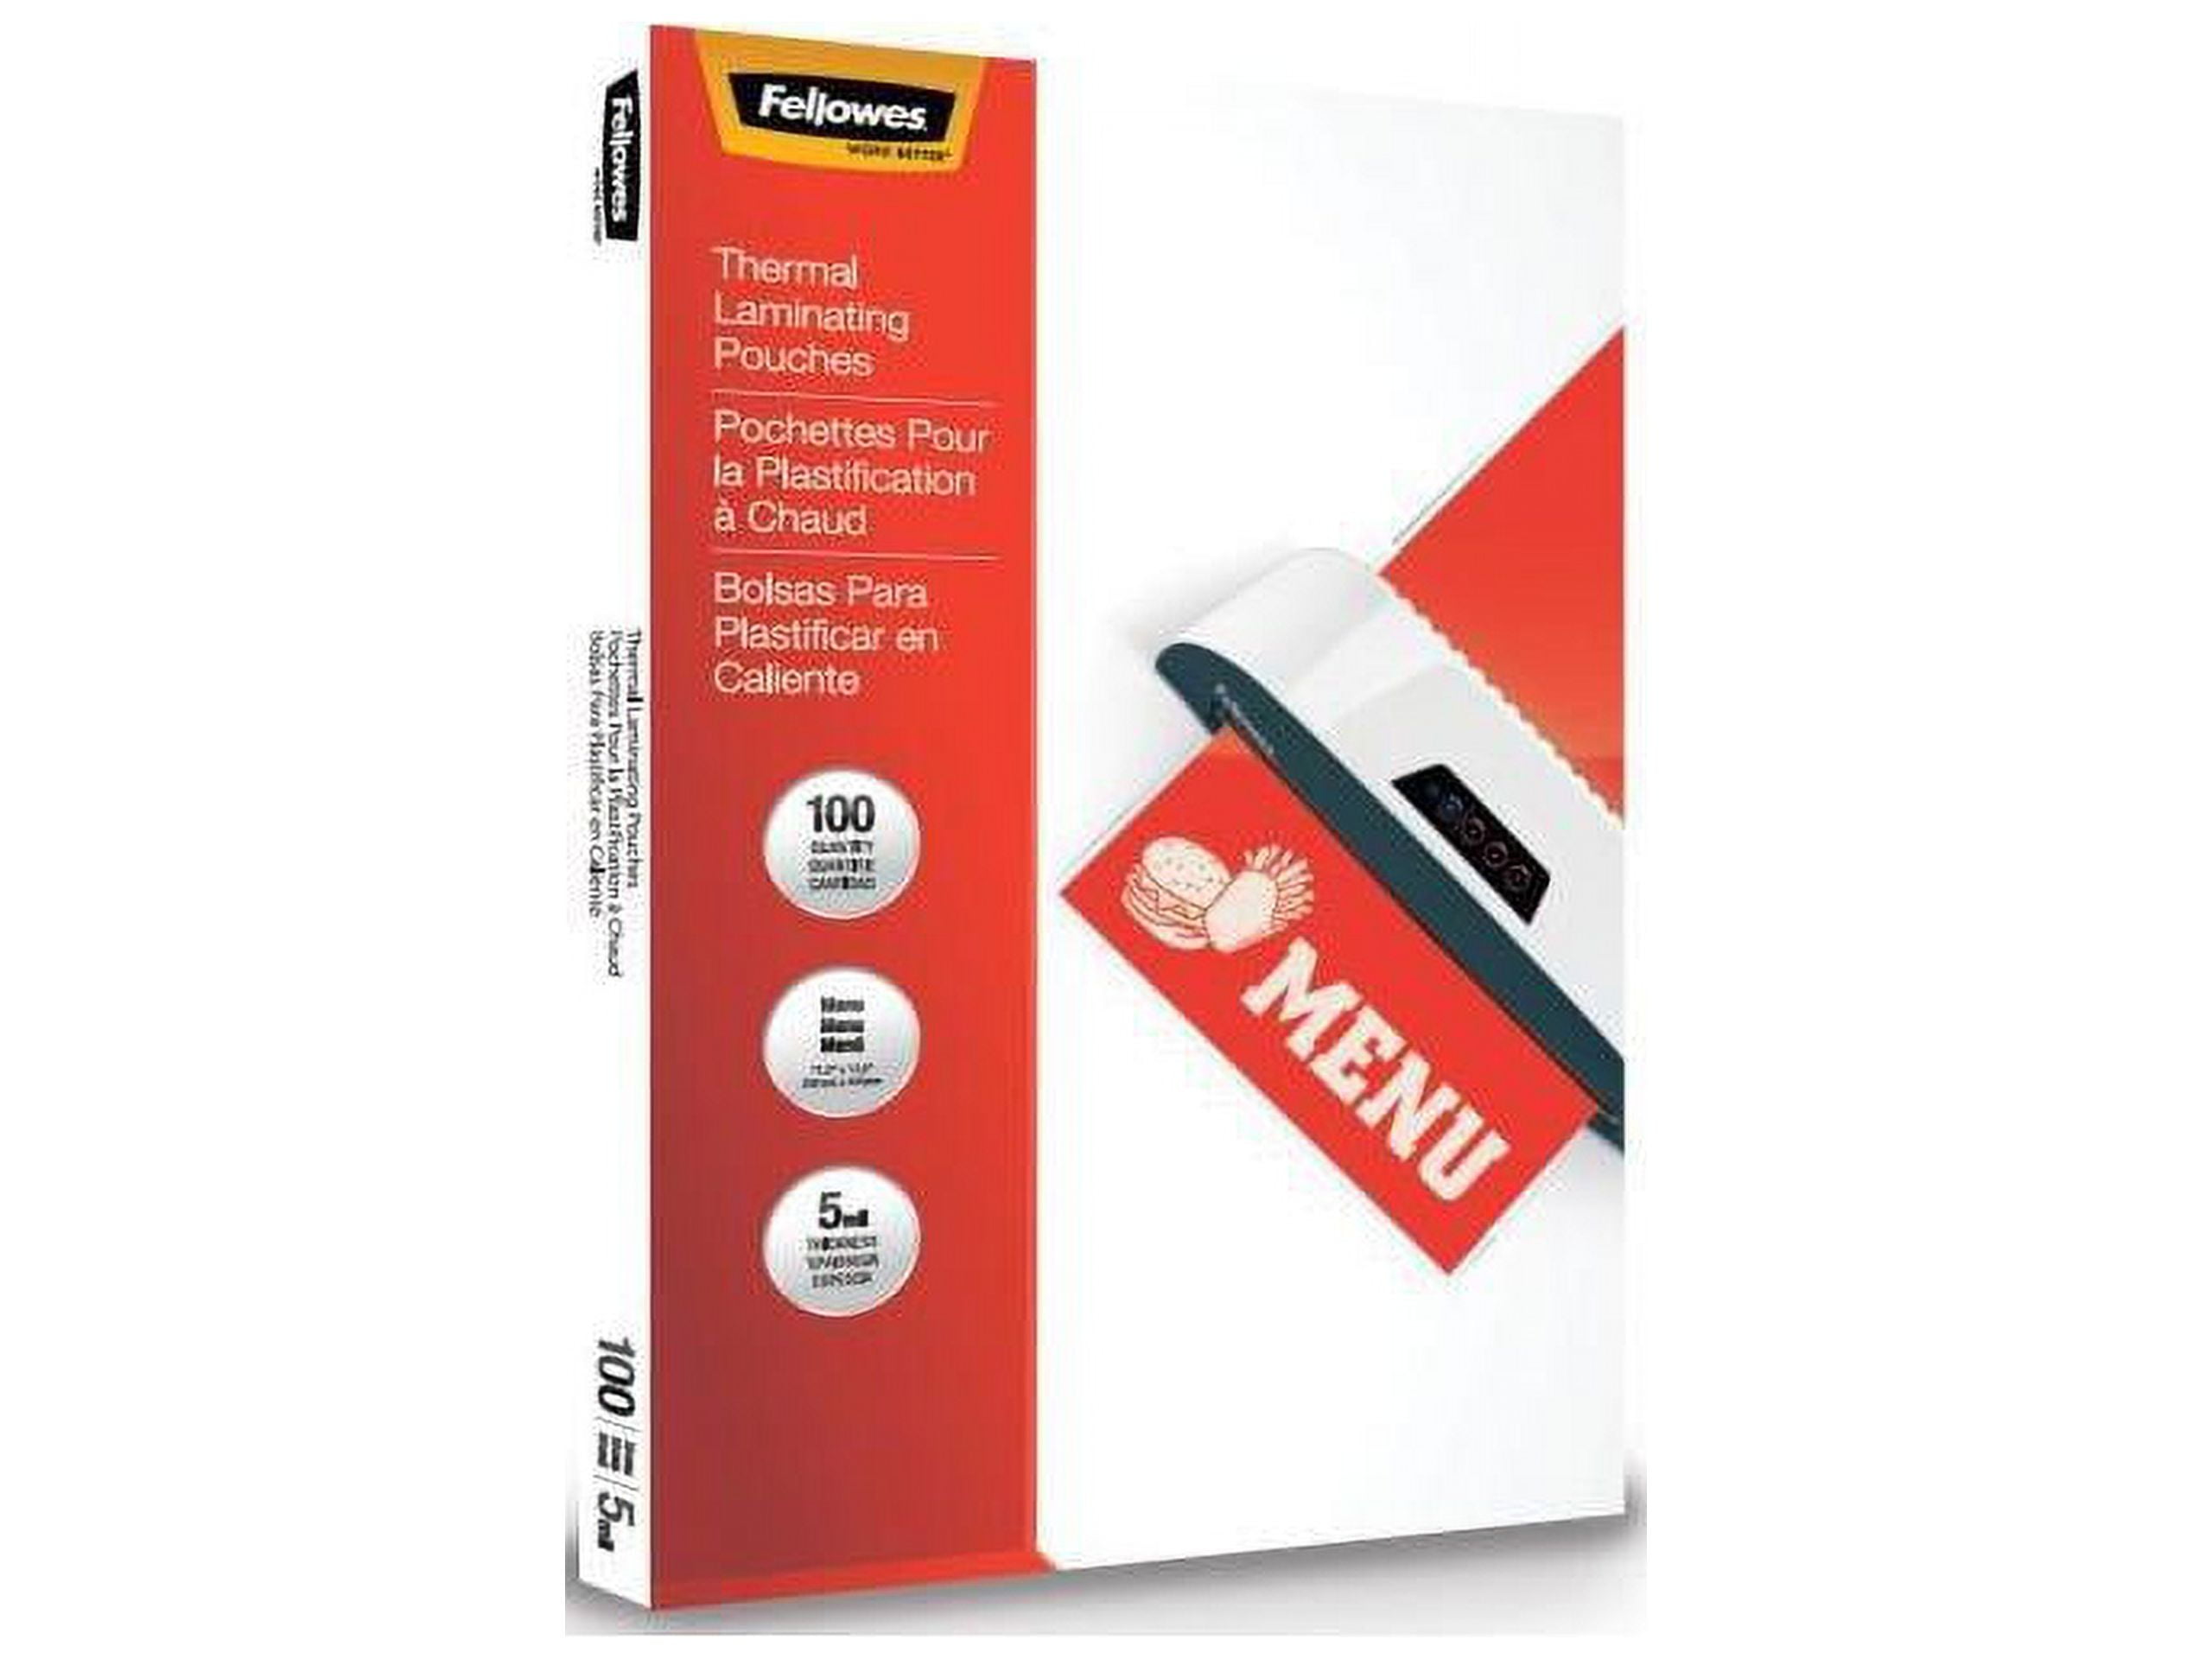 Laminating 5746001 5 Fellowes Pouches Thermal 100/Pack Menu mil